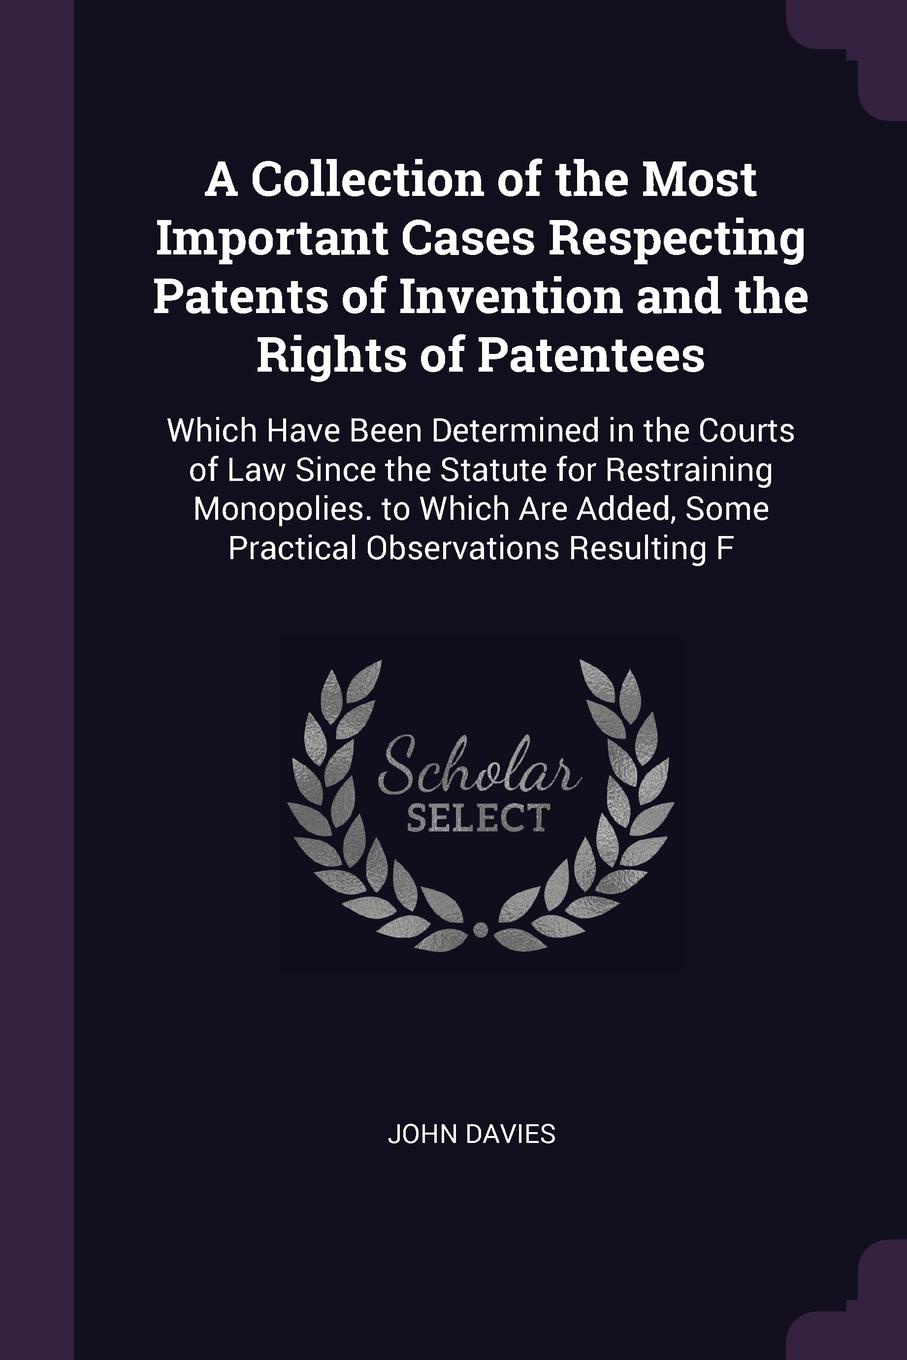 A Collection of the Most Important Cases Respecting Patents of Invention and the Rights of Patentees. Which Have Been Determined in the Courts of Law Since the Statute for Restraining Monopolies. to Which Are Added, Some Practical Observations Res...